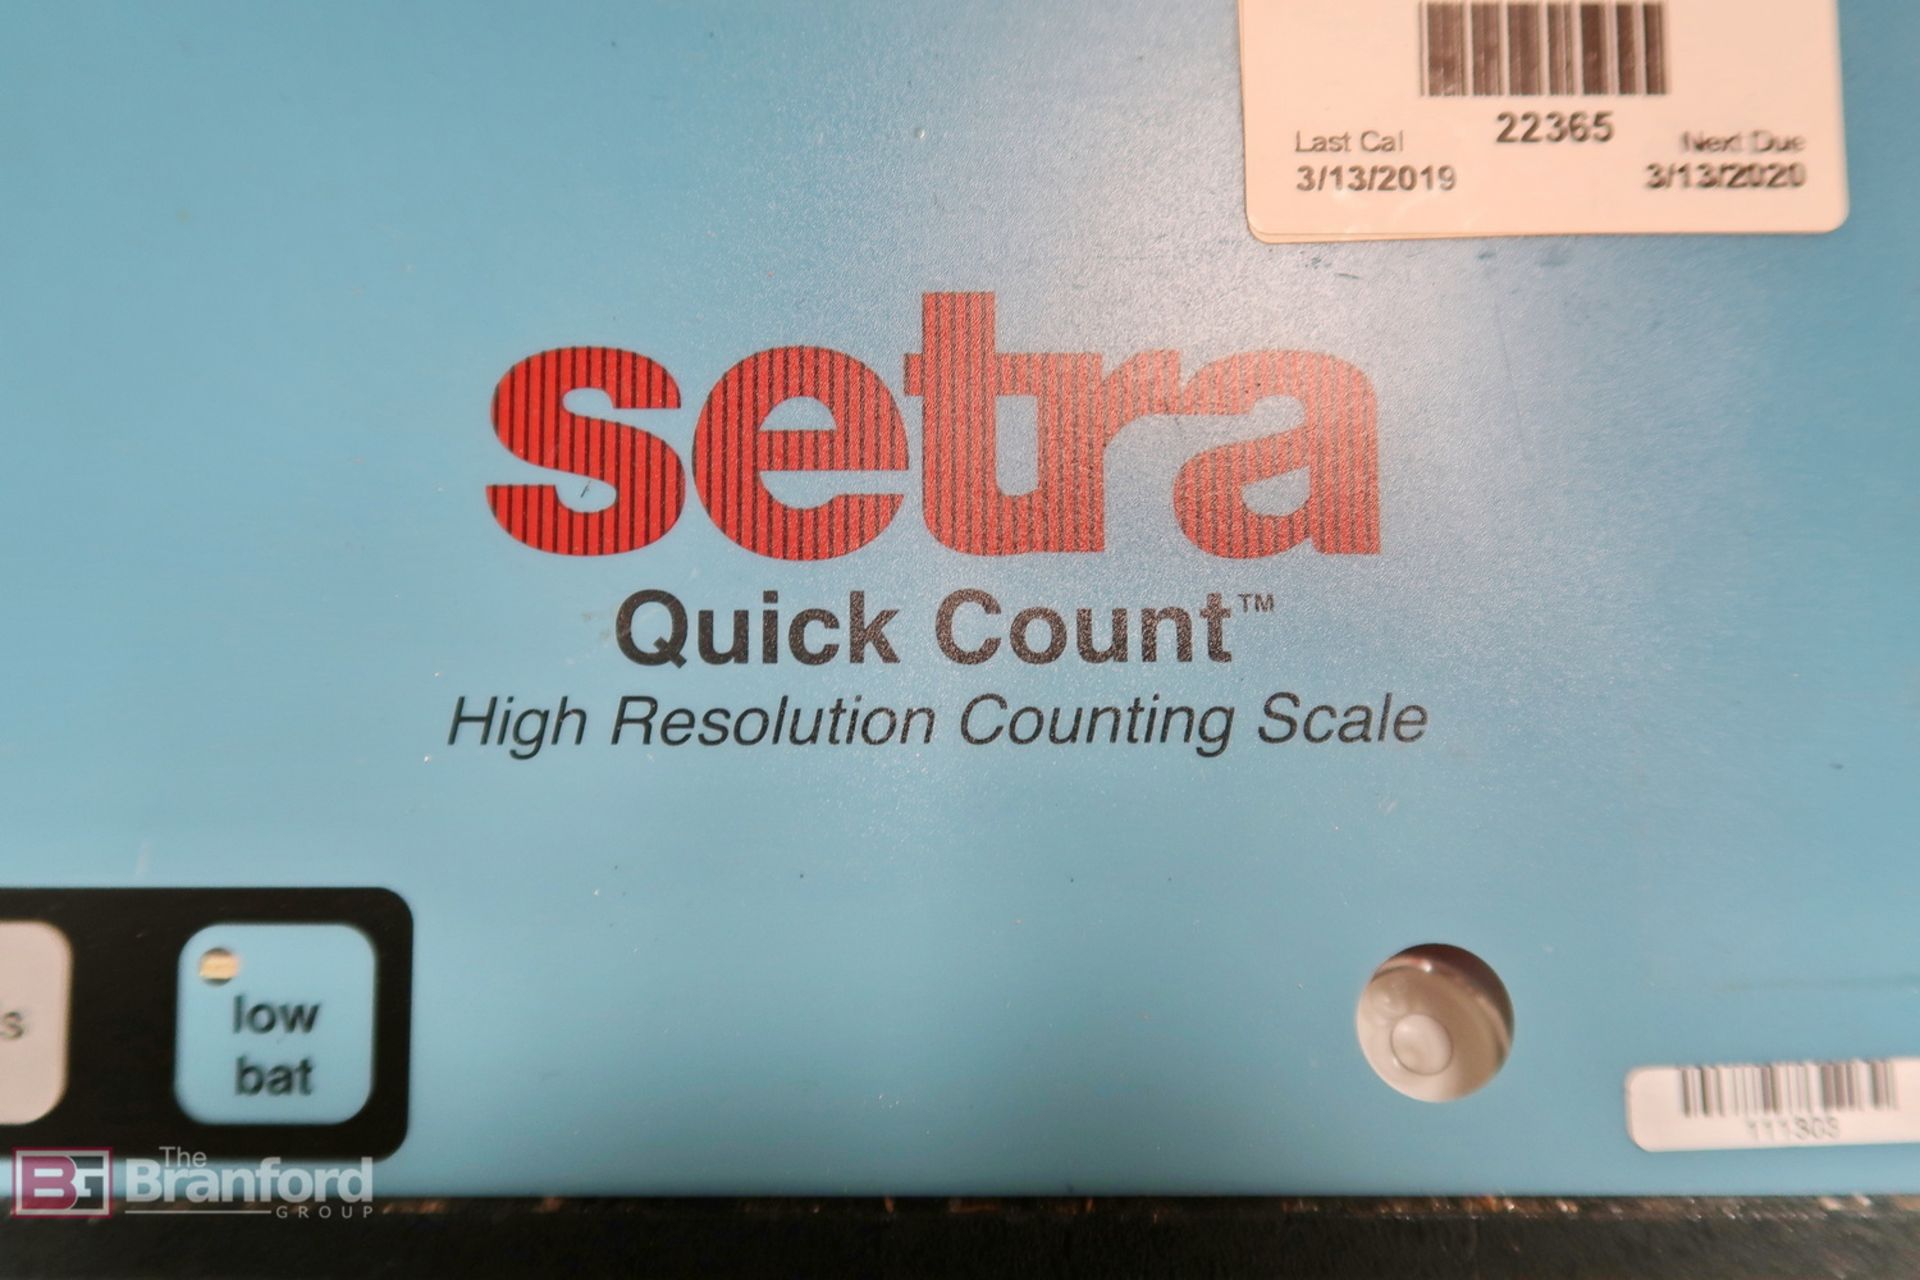 Setra Quick Count high resolution counting source - Image 2 of 3